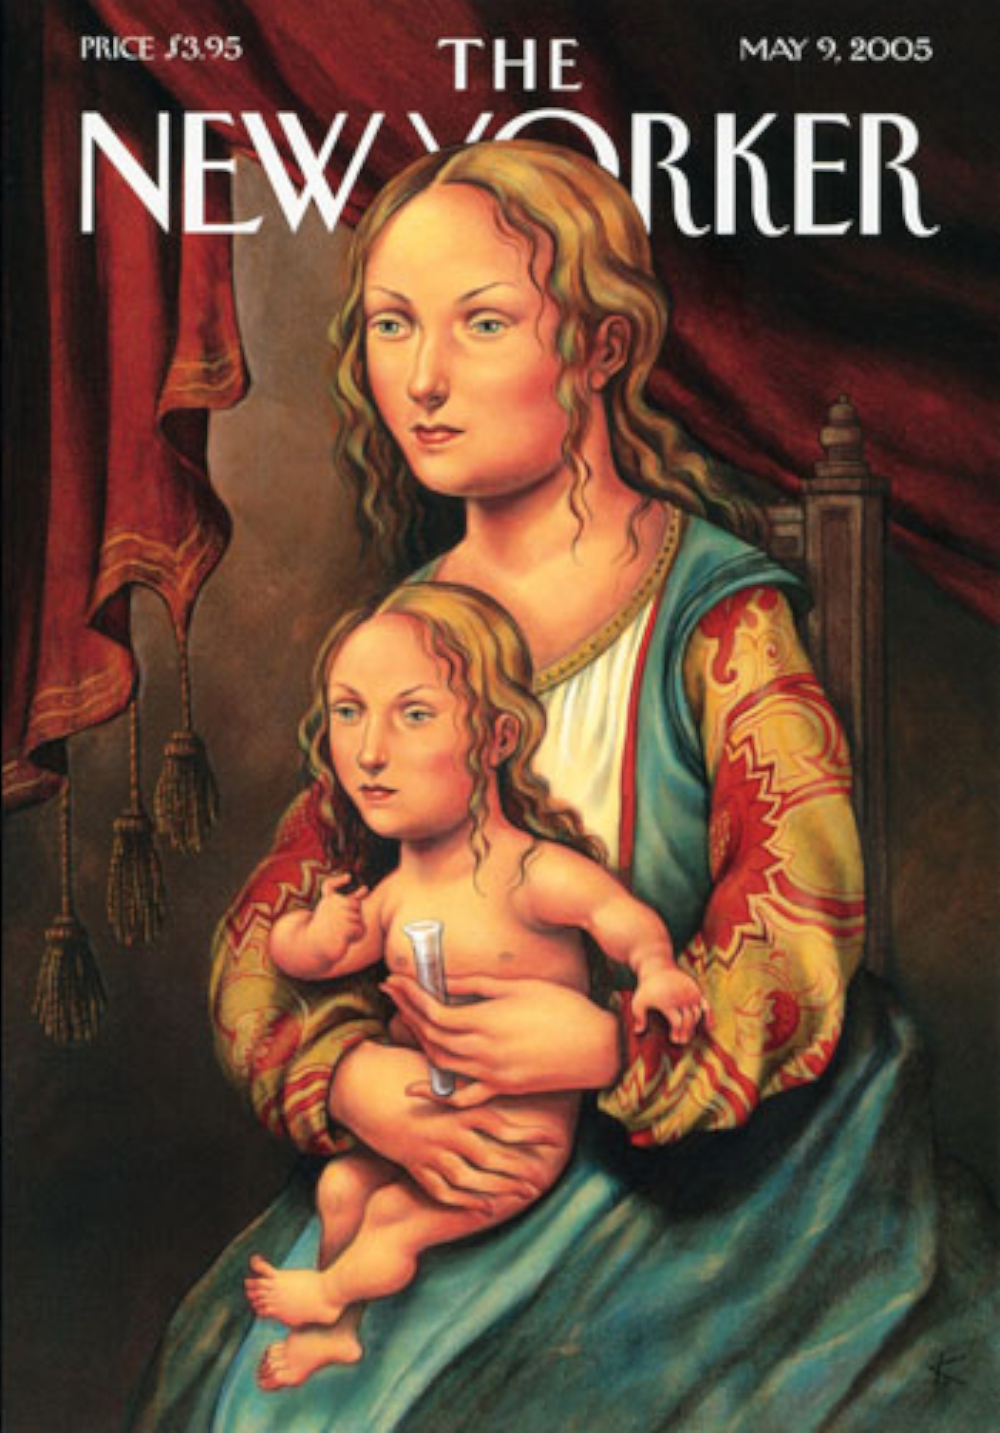 Cover of The New Yorker (May 9, 2005): 'Clone'.